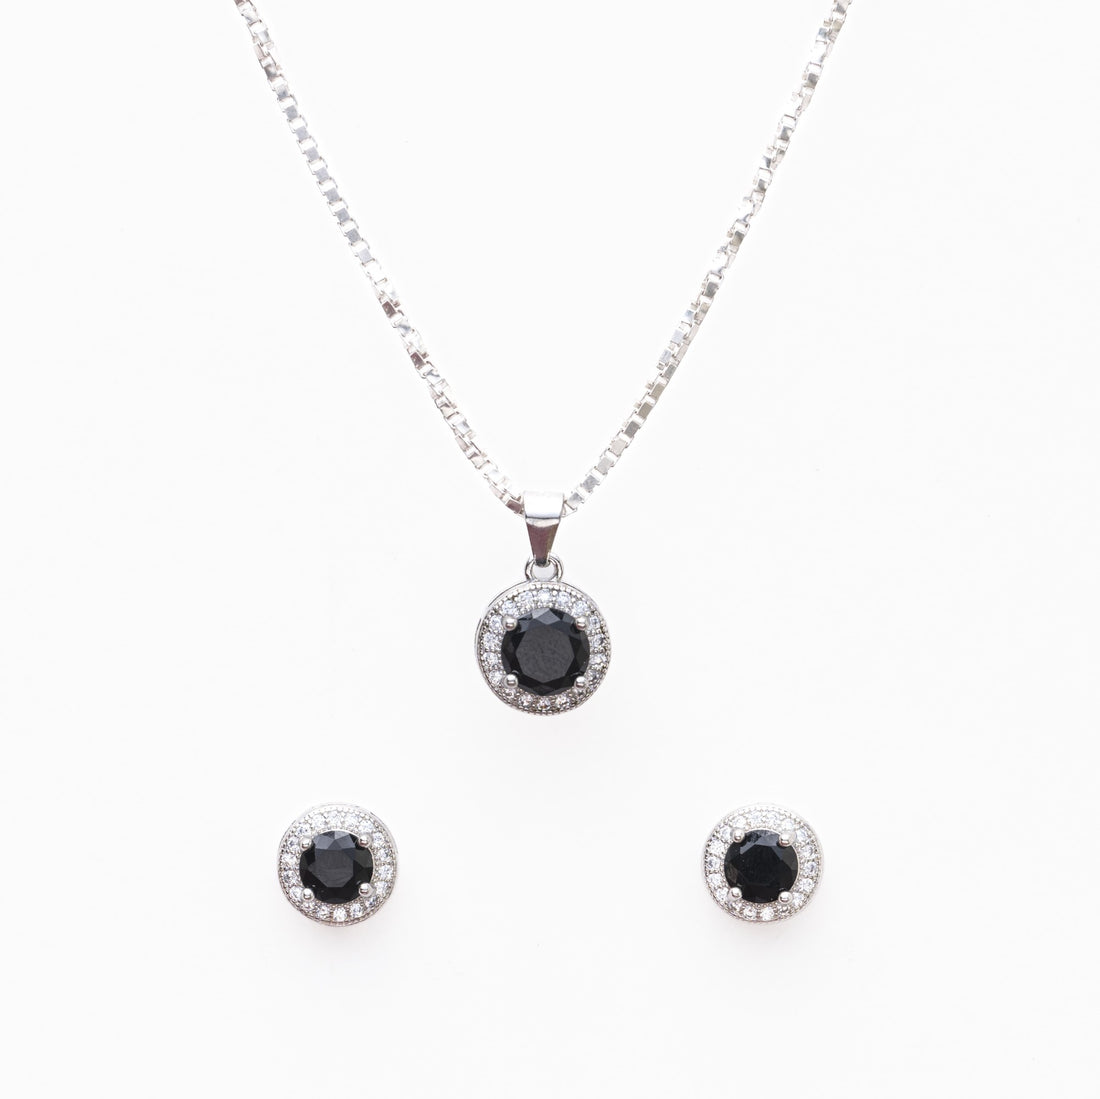 Silver Set Chain Circular Pendant and Earrings with Black Stones for Women